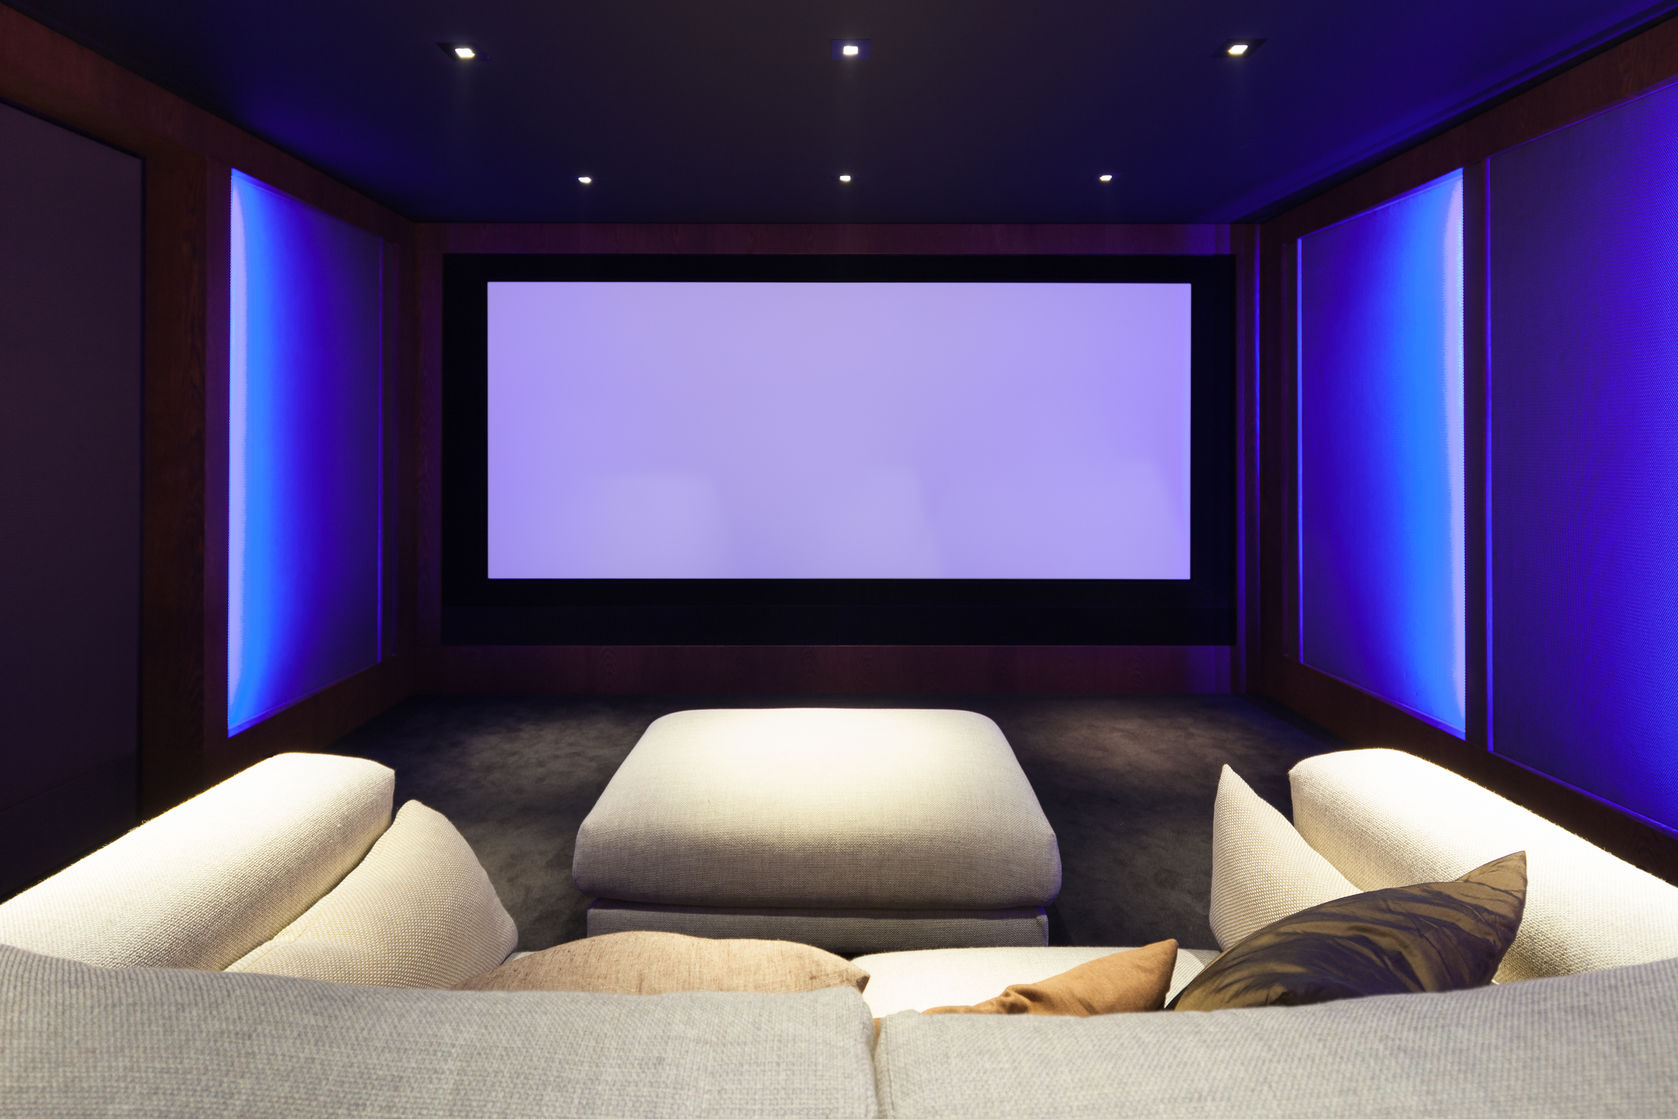 The Benefits of a Surround Sound System